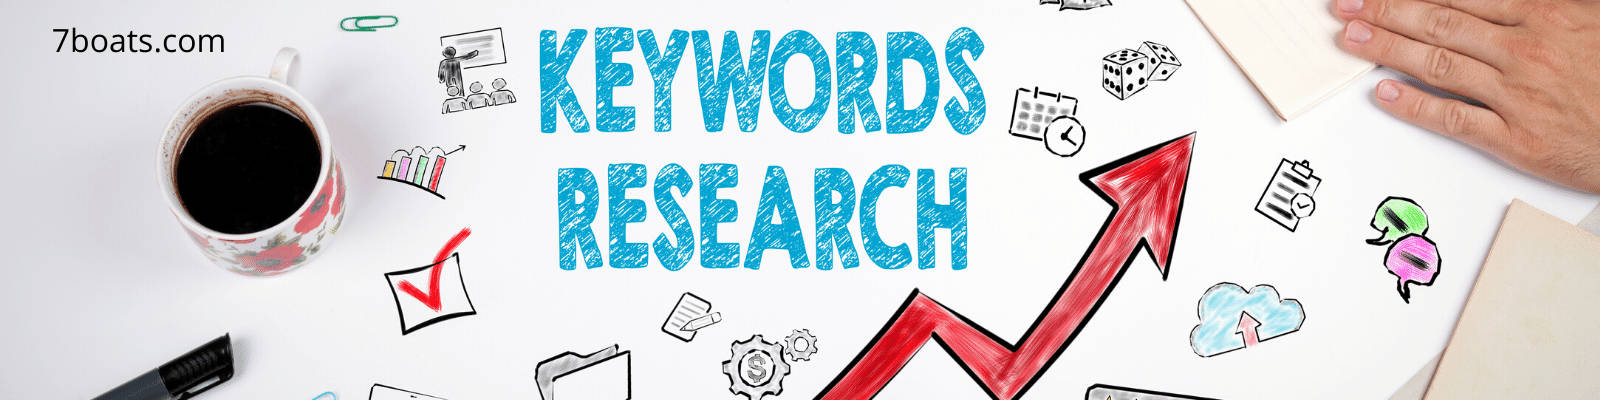 keyword research techniques